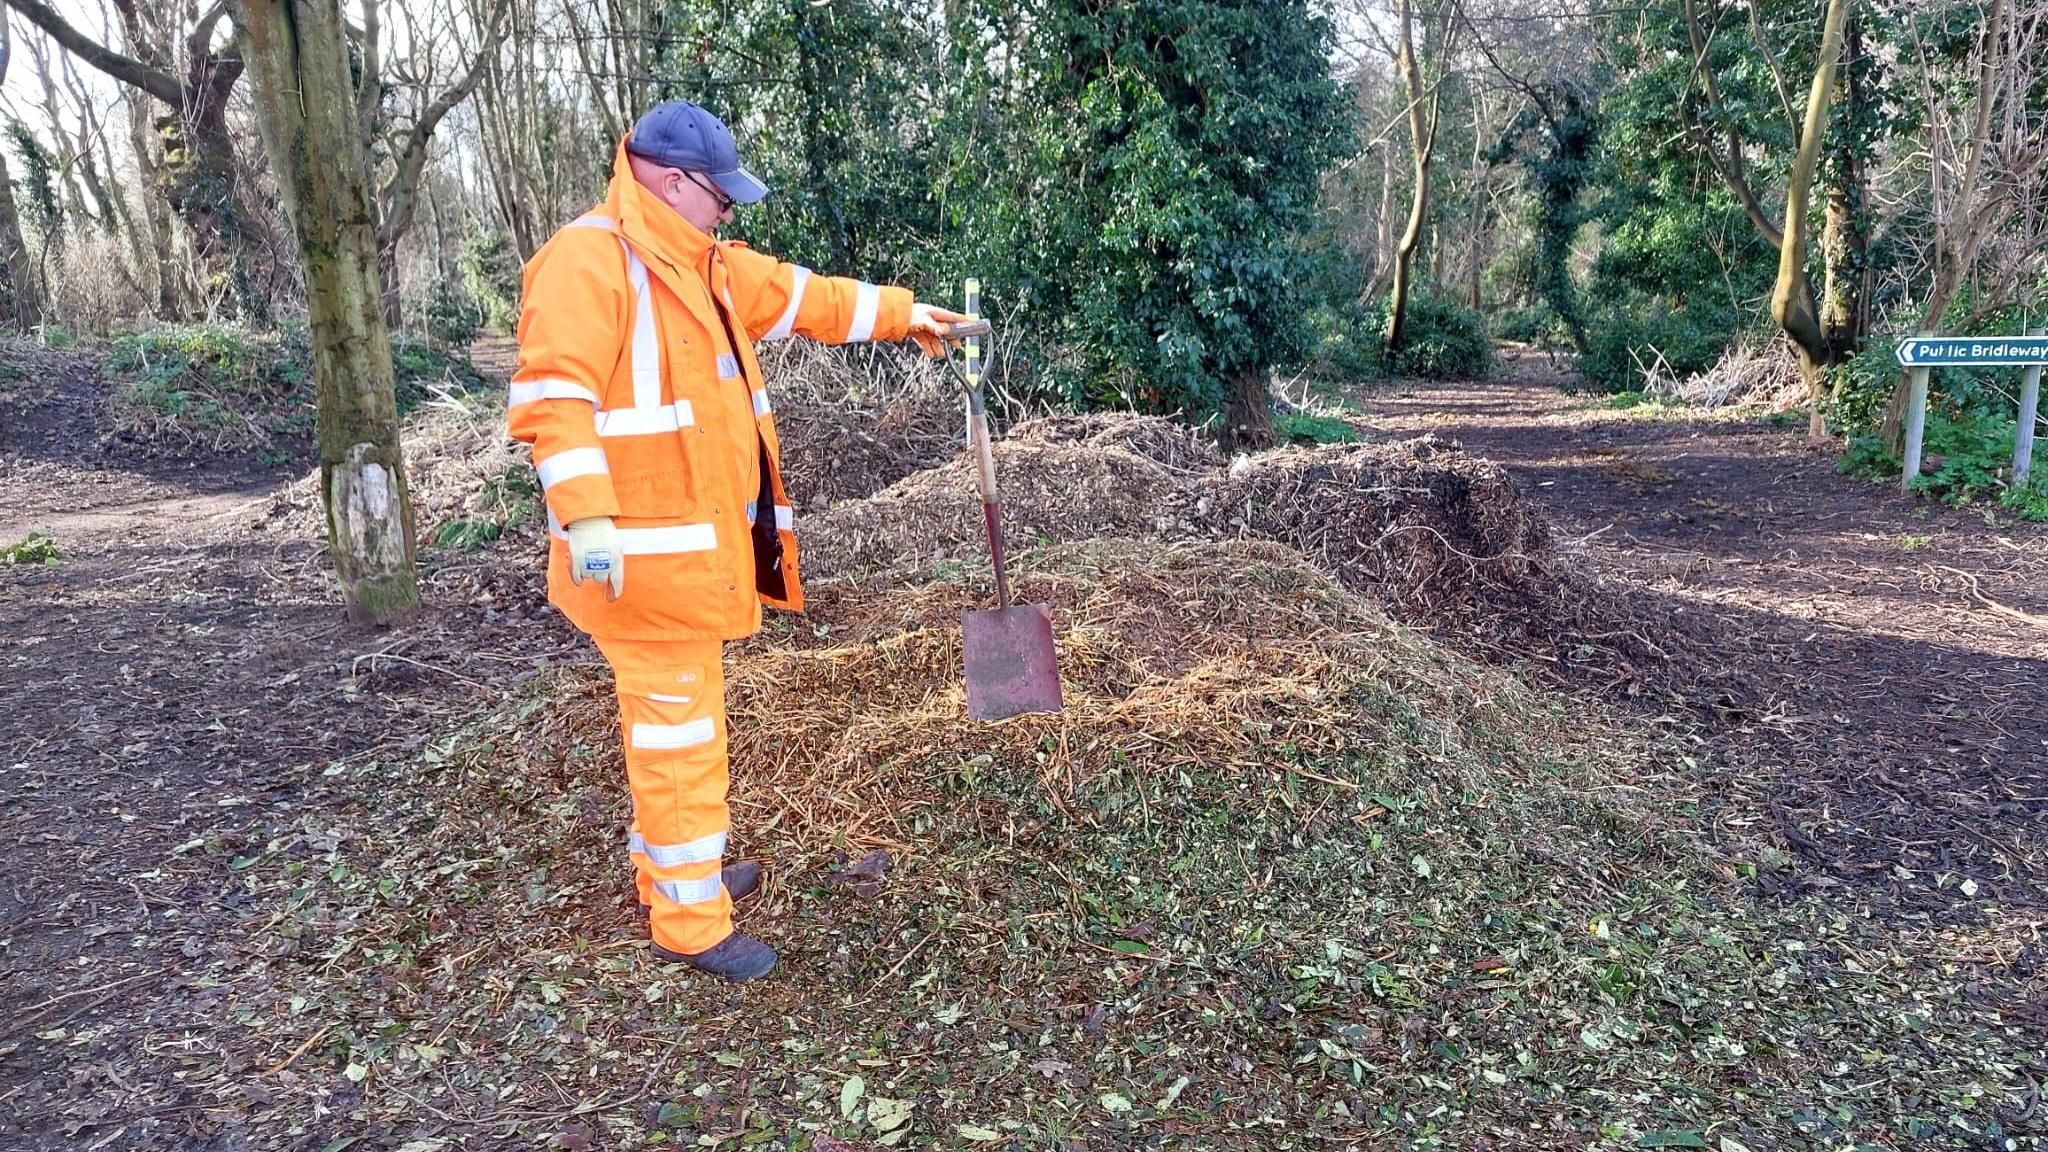 A council worker next to a dumped pile of garden waste